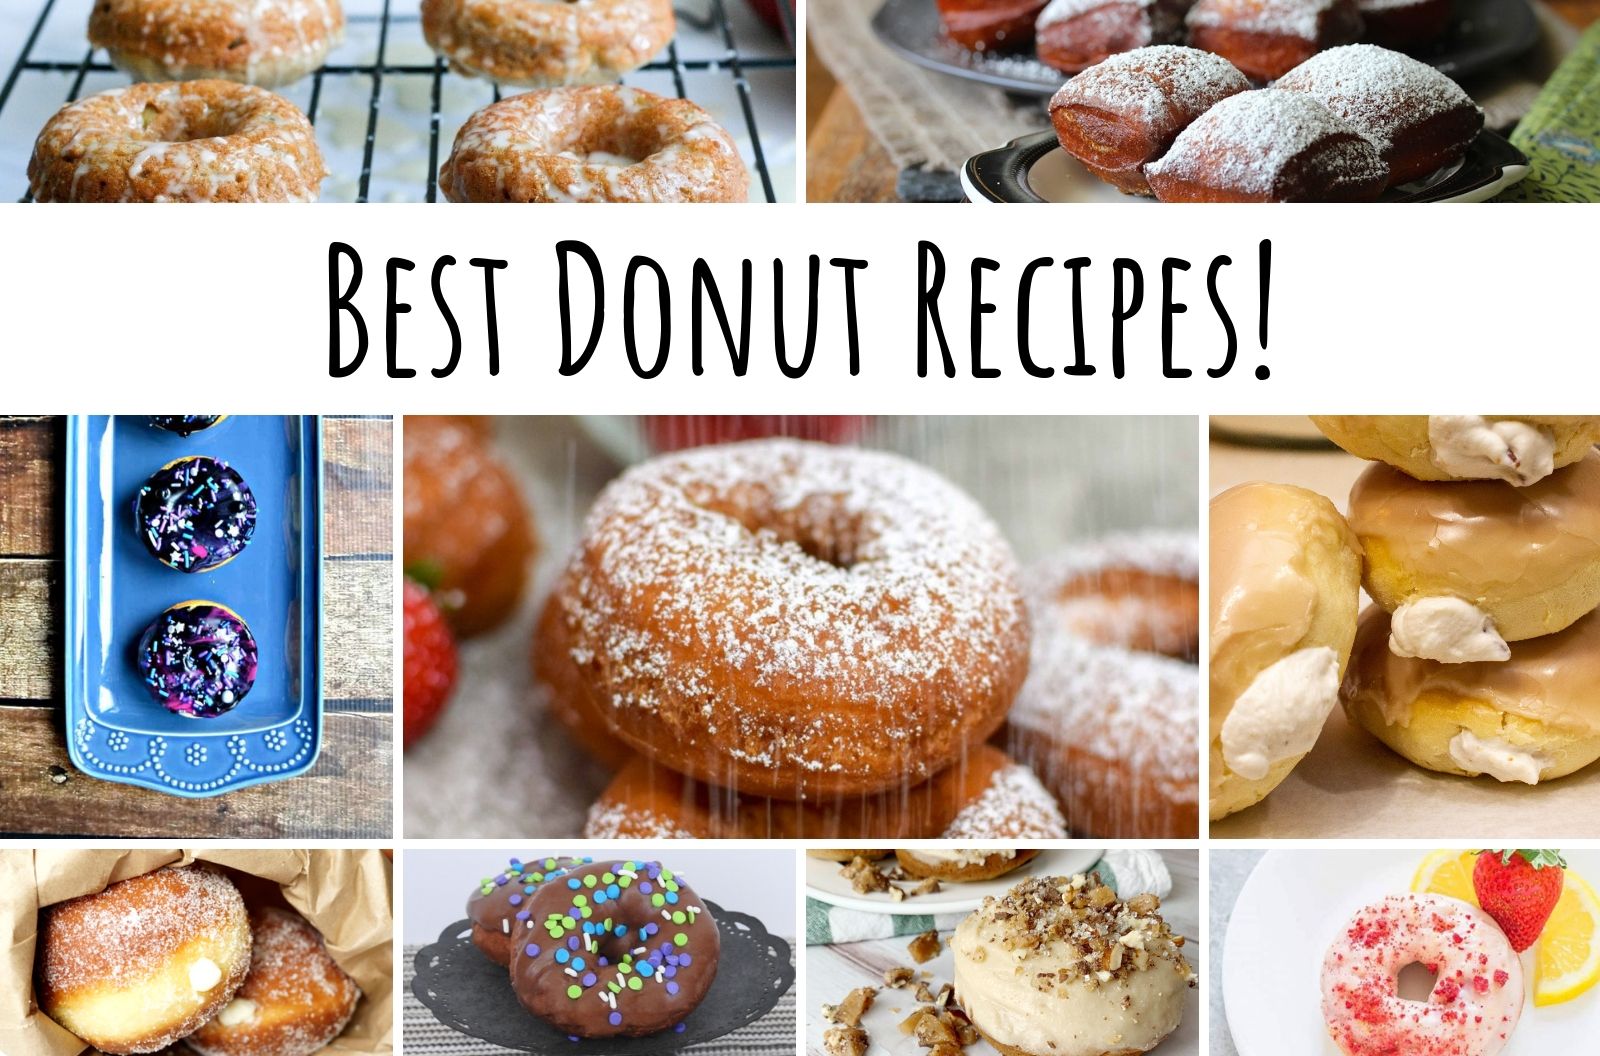 gallery of 9 pictures of different donuts. across it is a banner that says Best Donut Recipes!